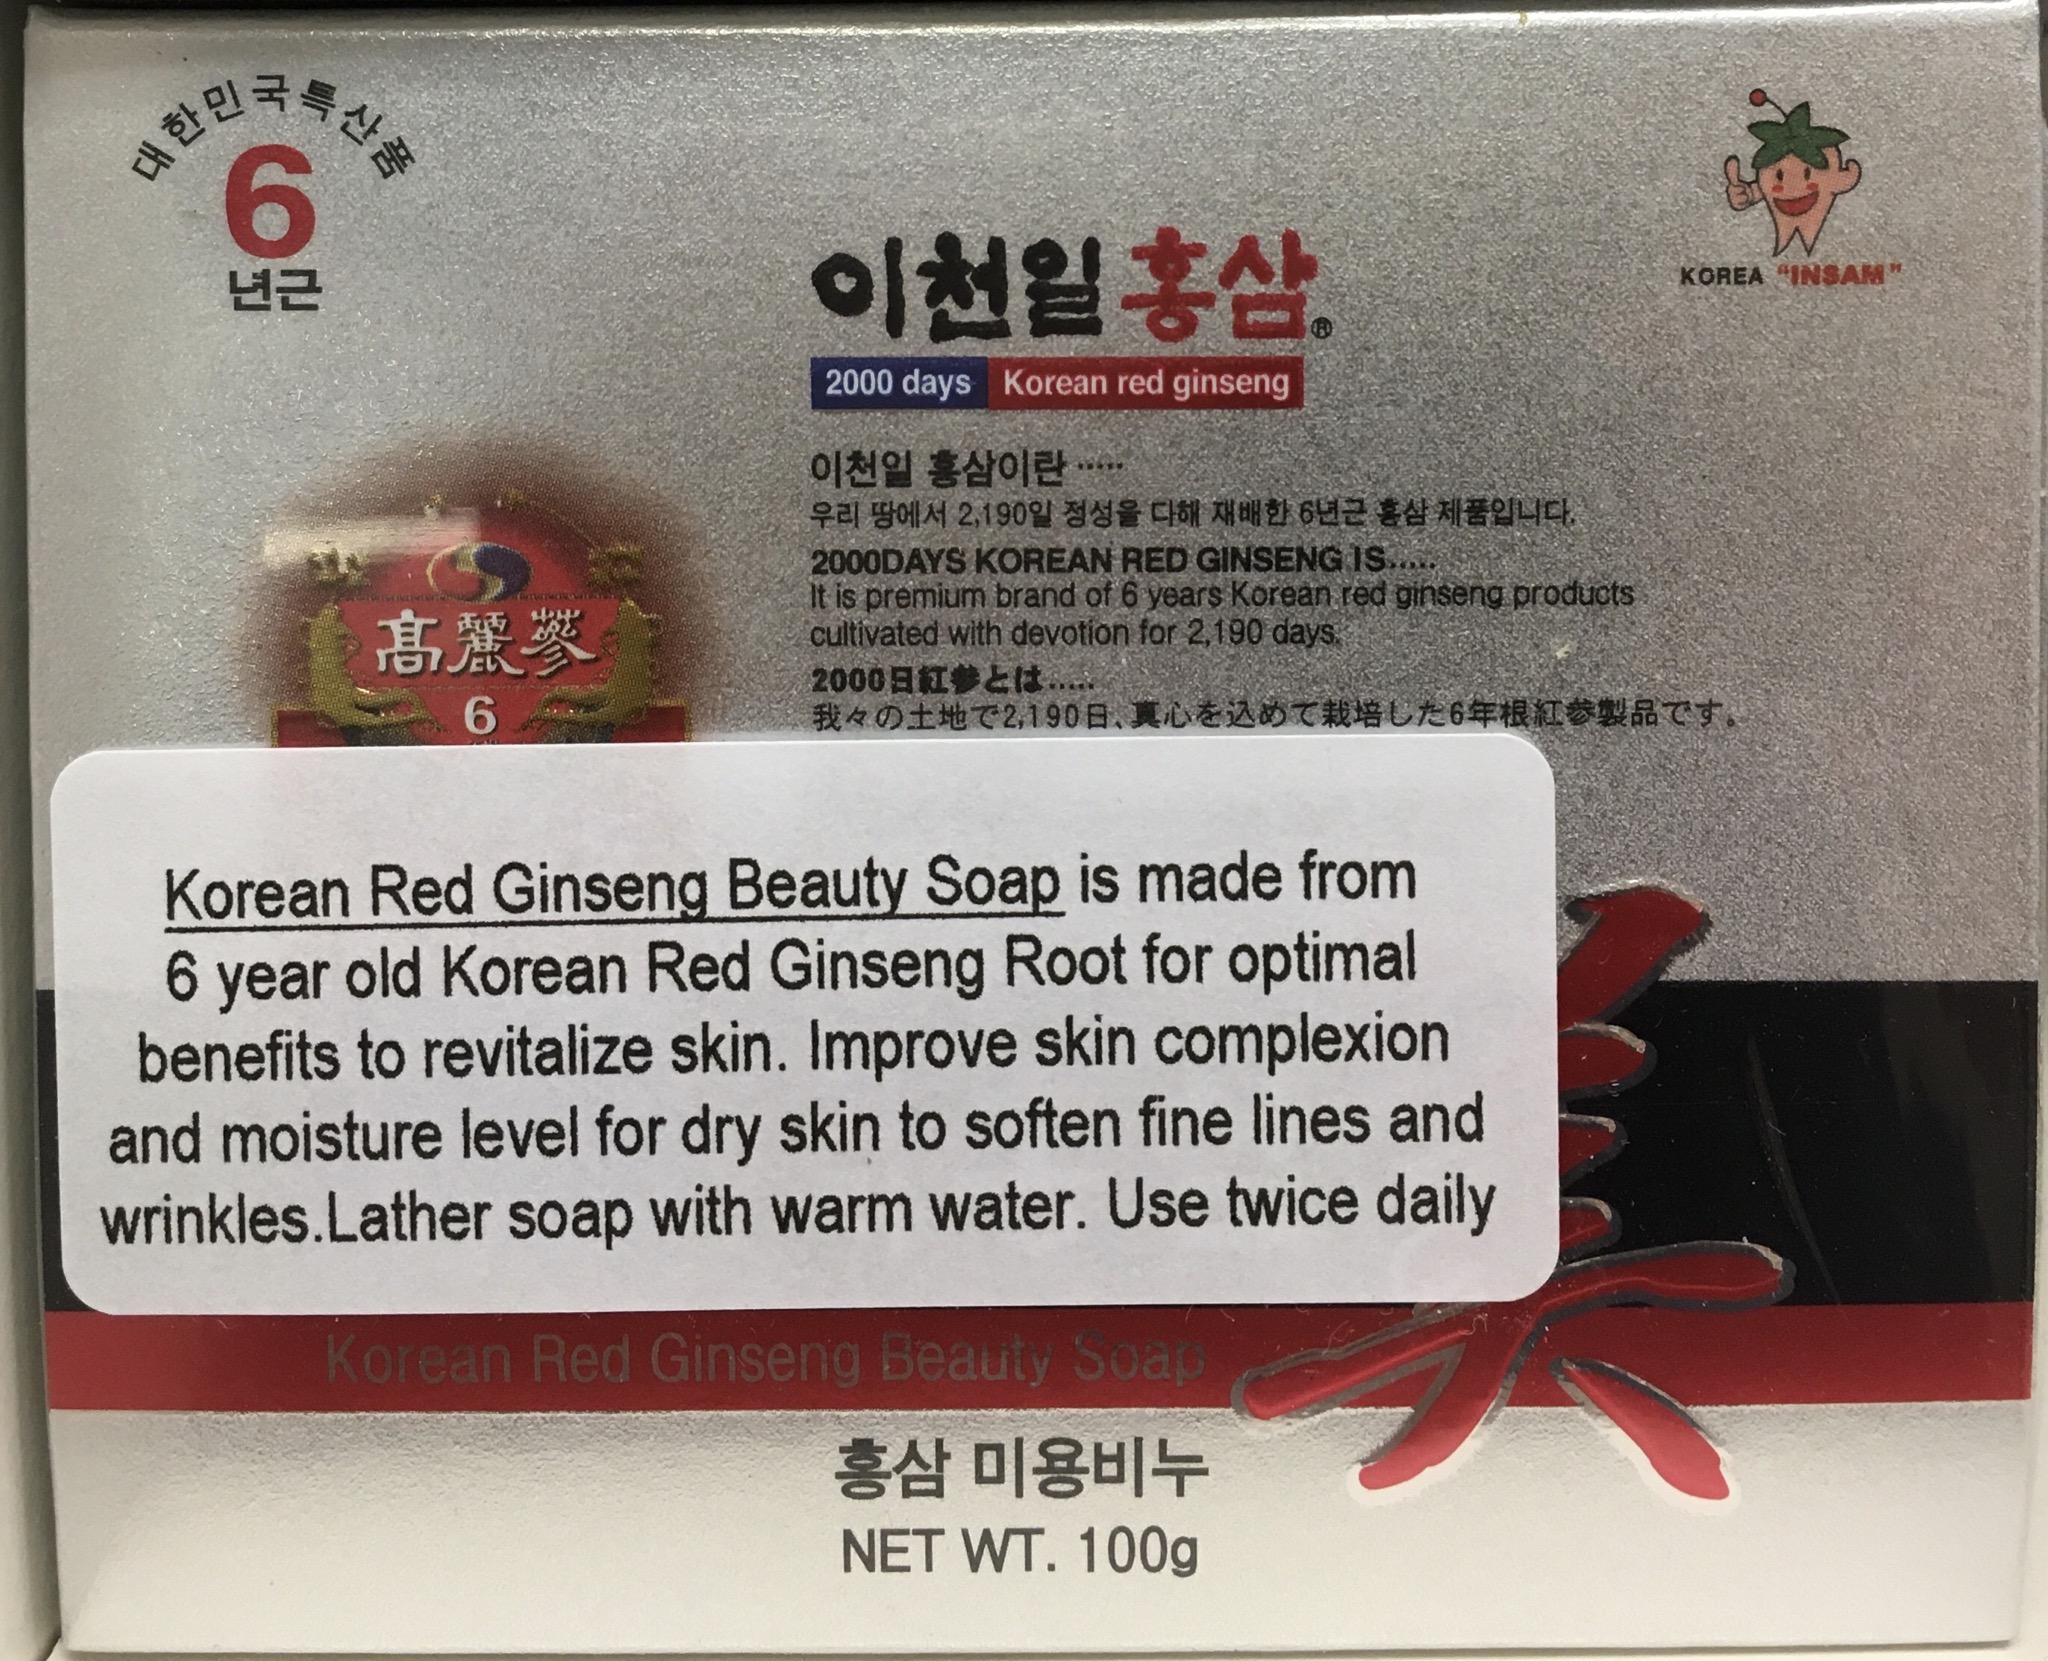 Korean Red Ginseng Beauty Soap (Buy3, Get 1 Free)